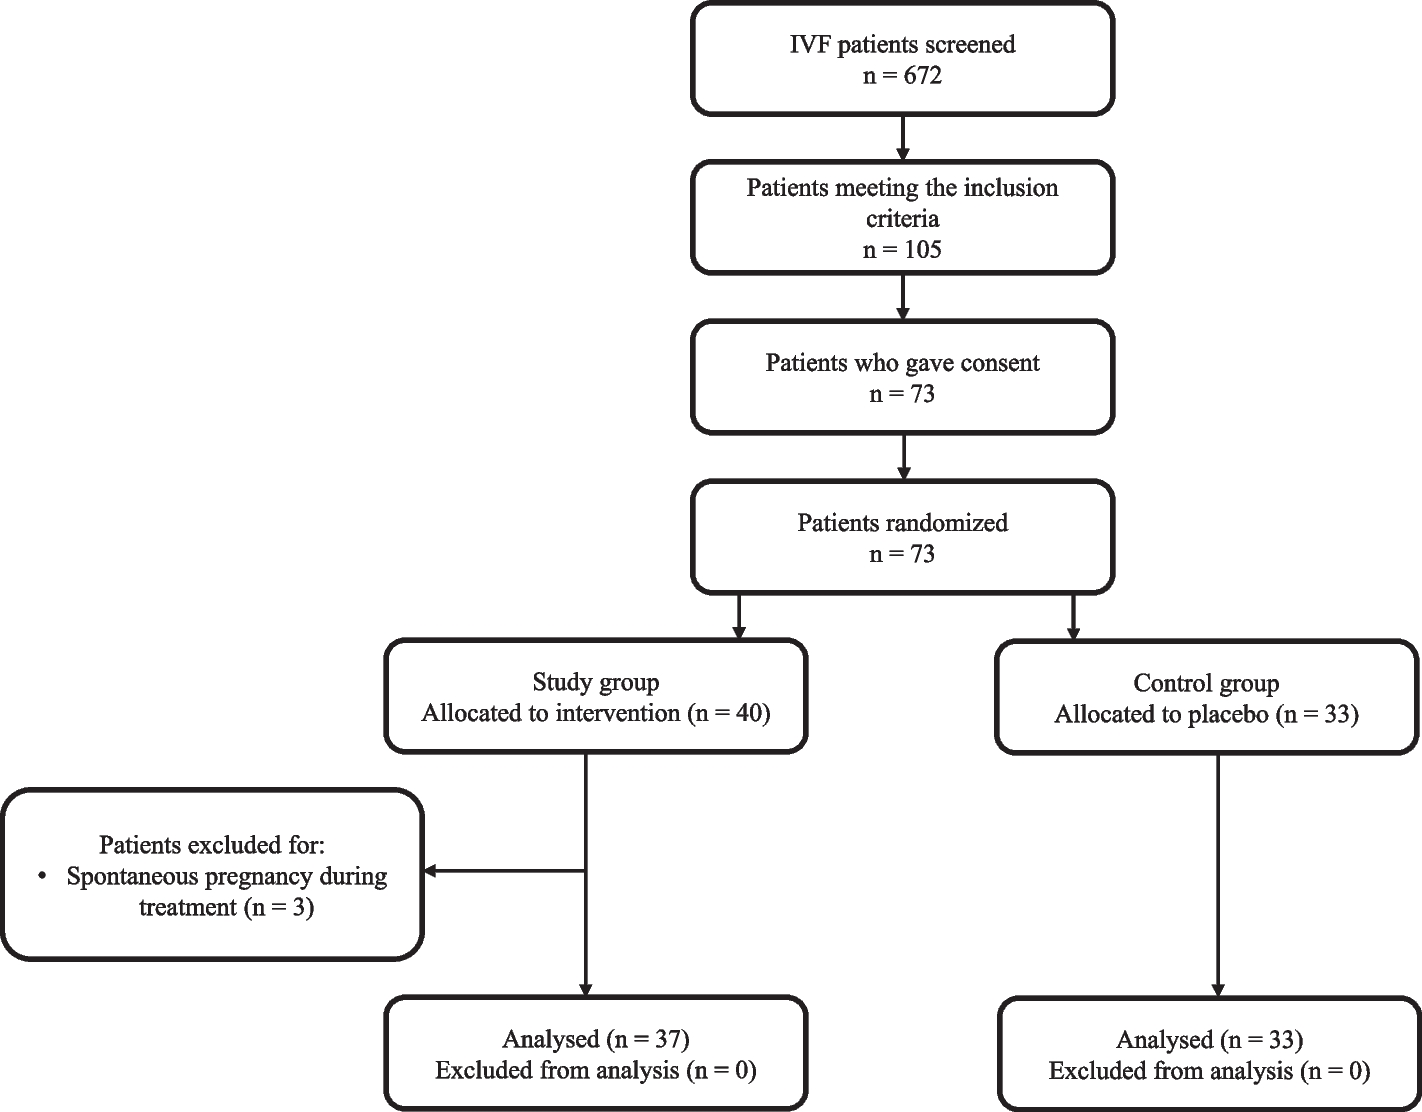 The impact of resveratrol on the outcome of the in vitro fertilization: an exploratory randomized placebo-controlled trial